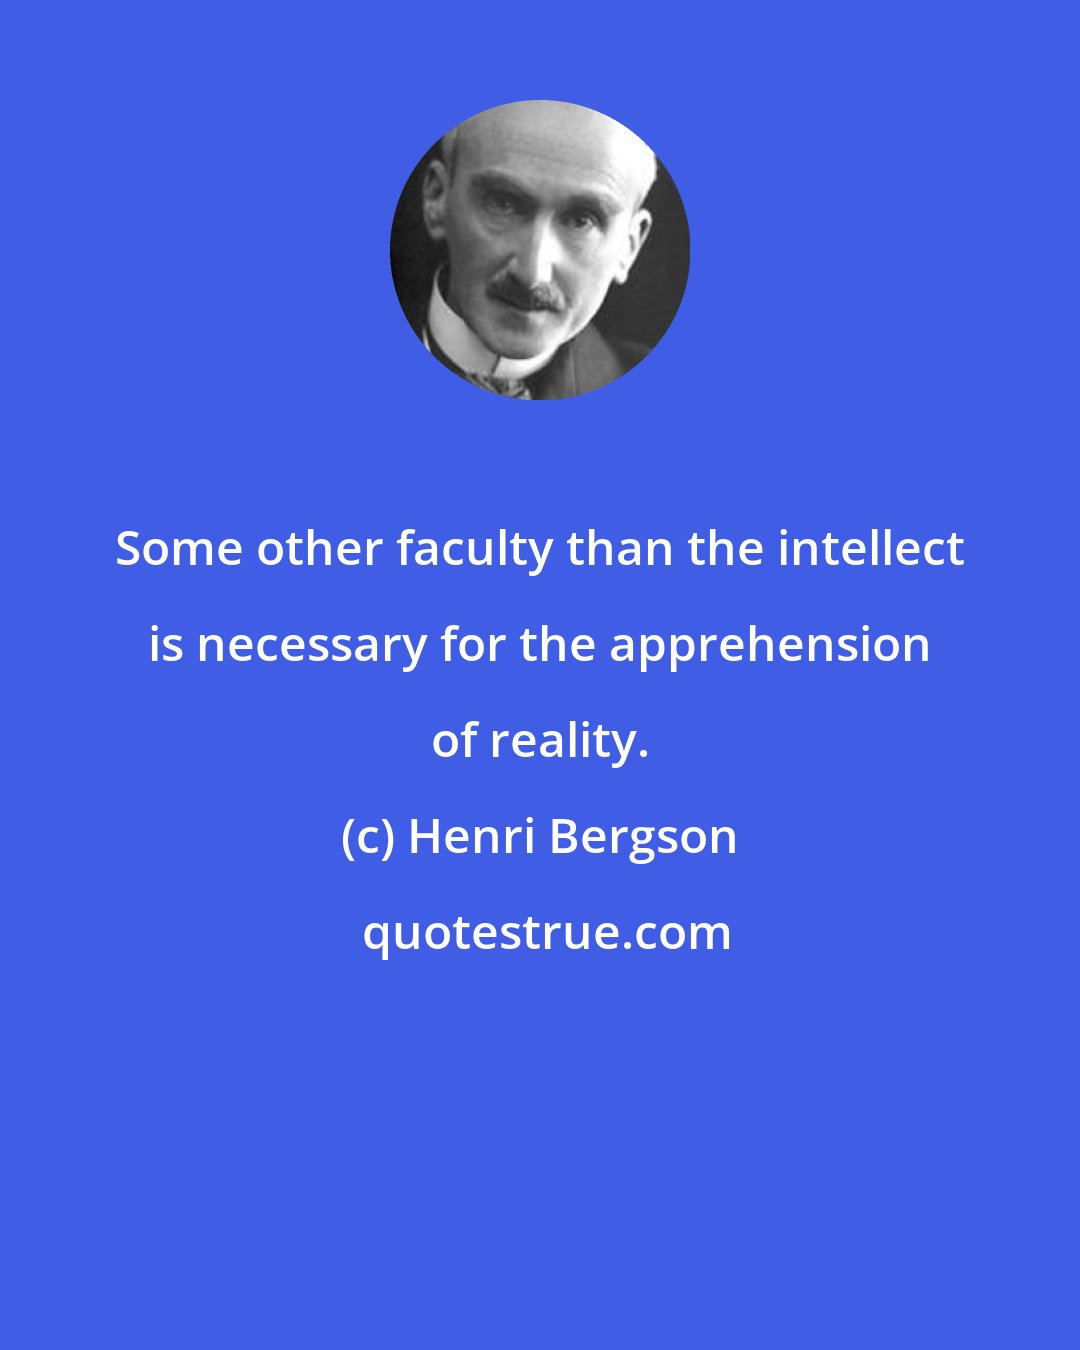 Henri Bergson: Some other faculty than the intellect is necessary for the apprehension of reality.